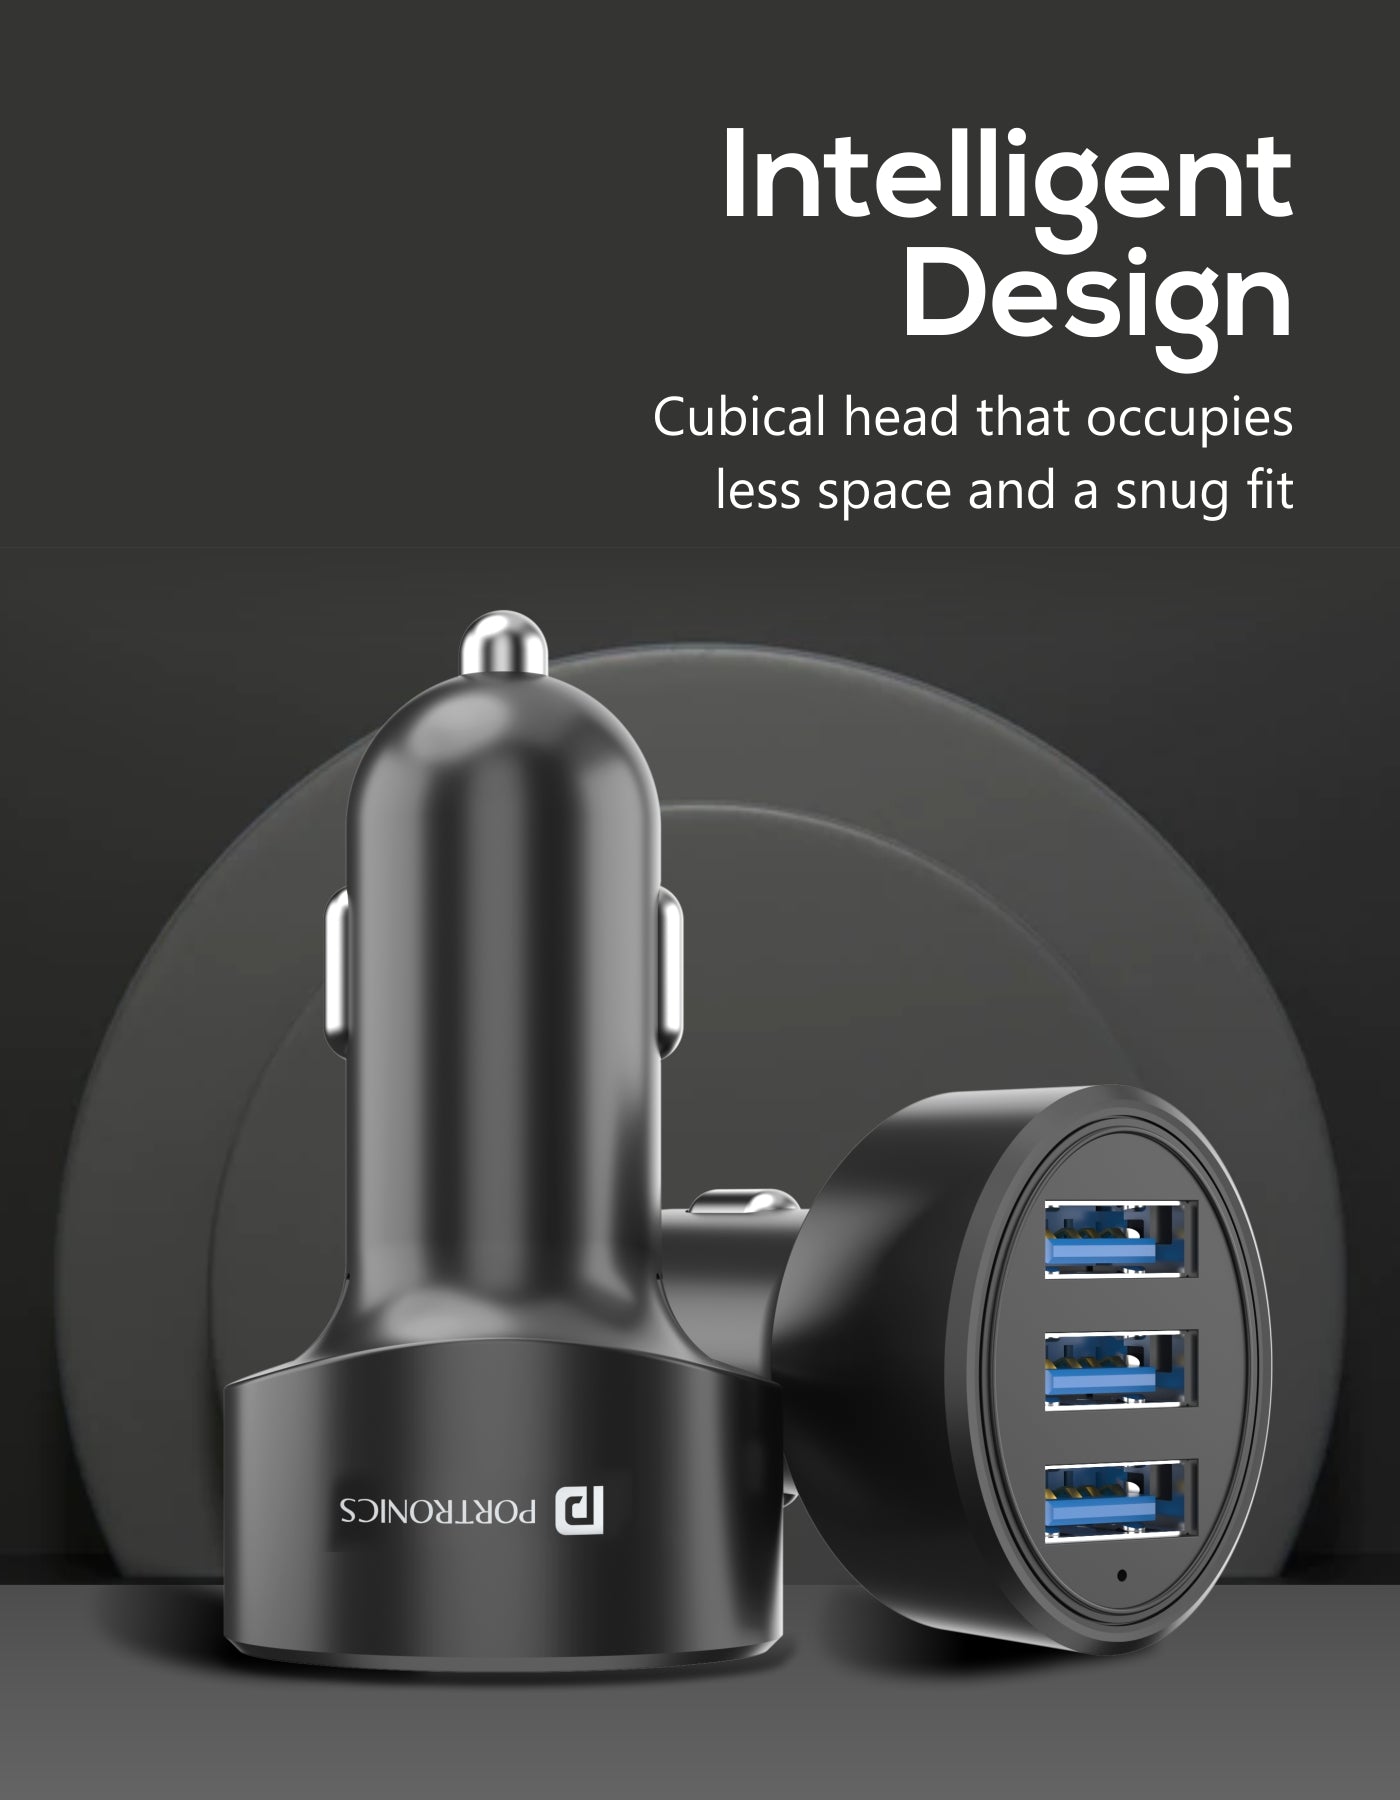 Portronics Car Power 12 car charger with 3 USB ports Cubical head that occupies less space and a snug fit